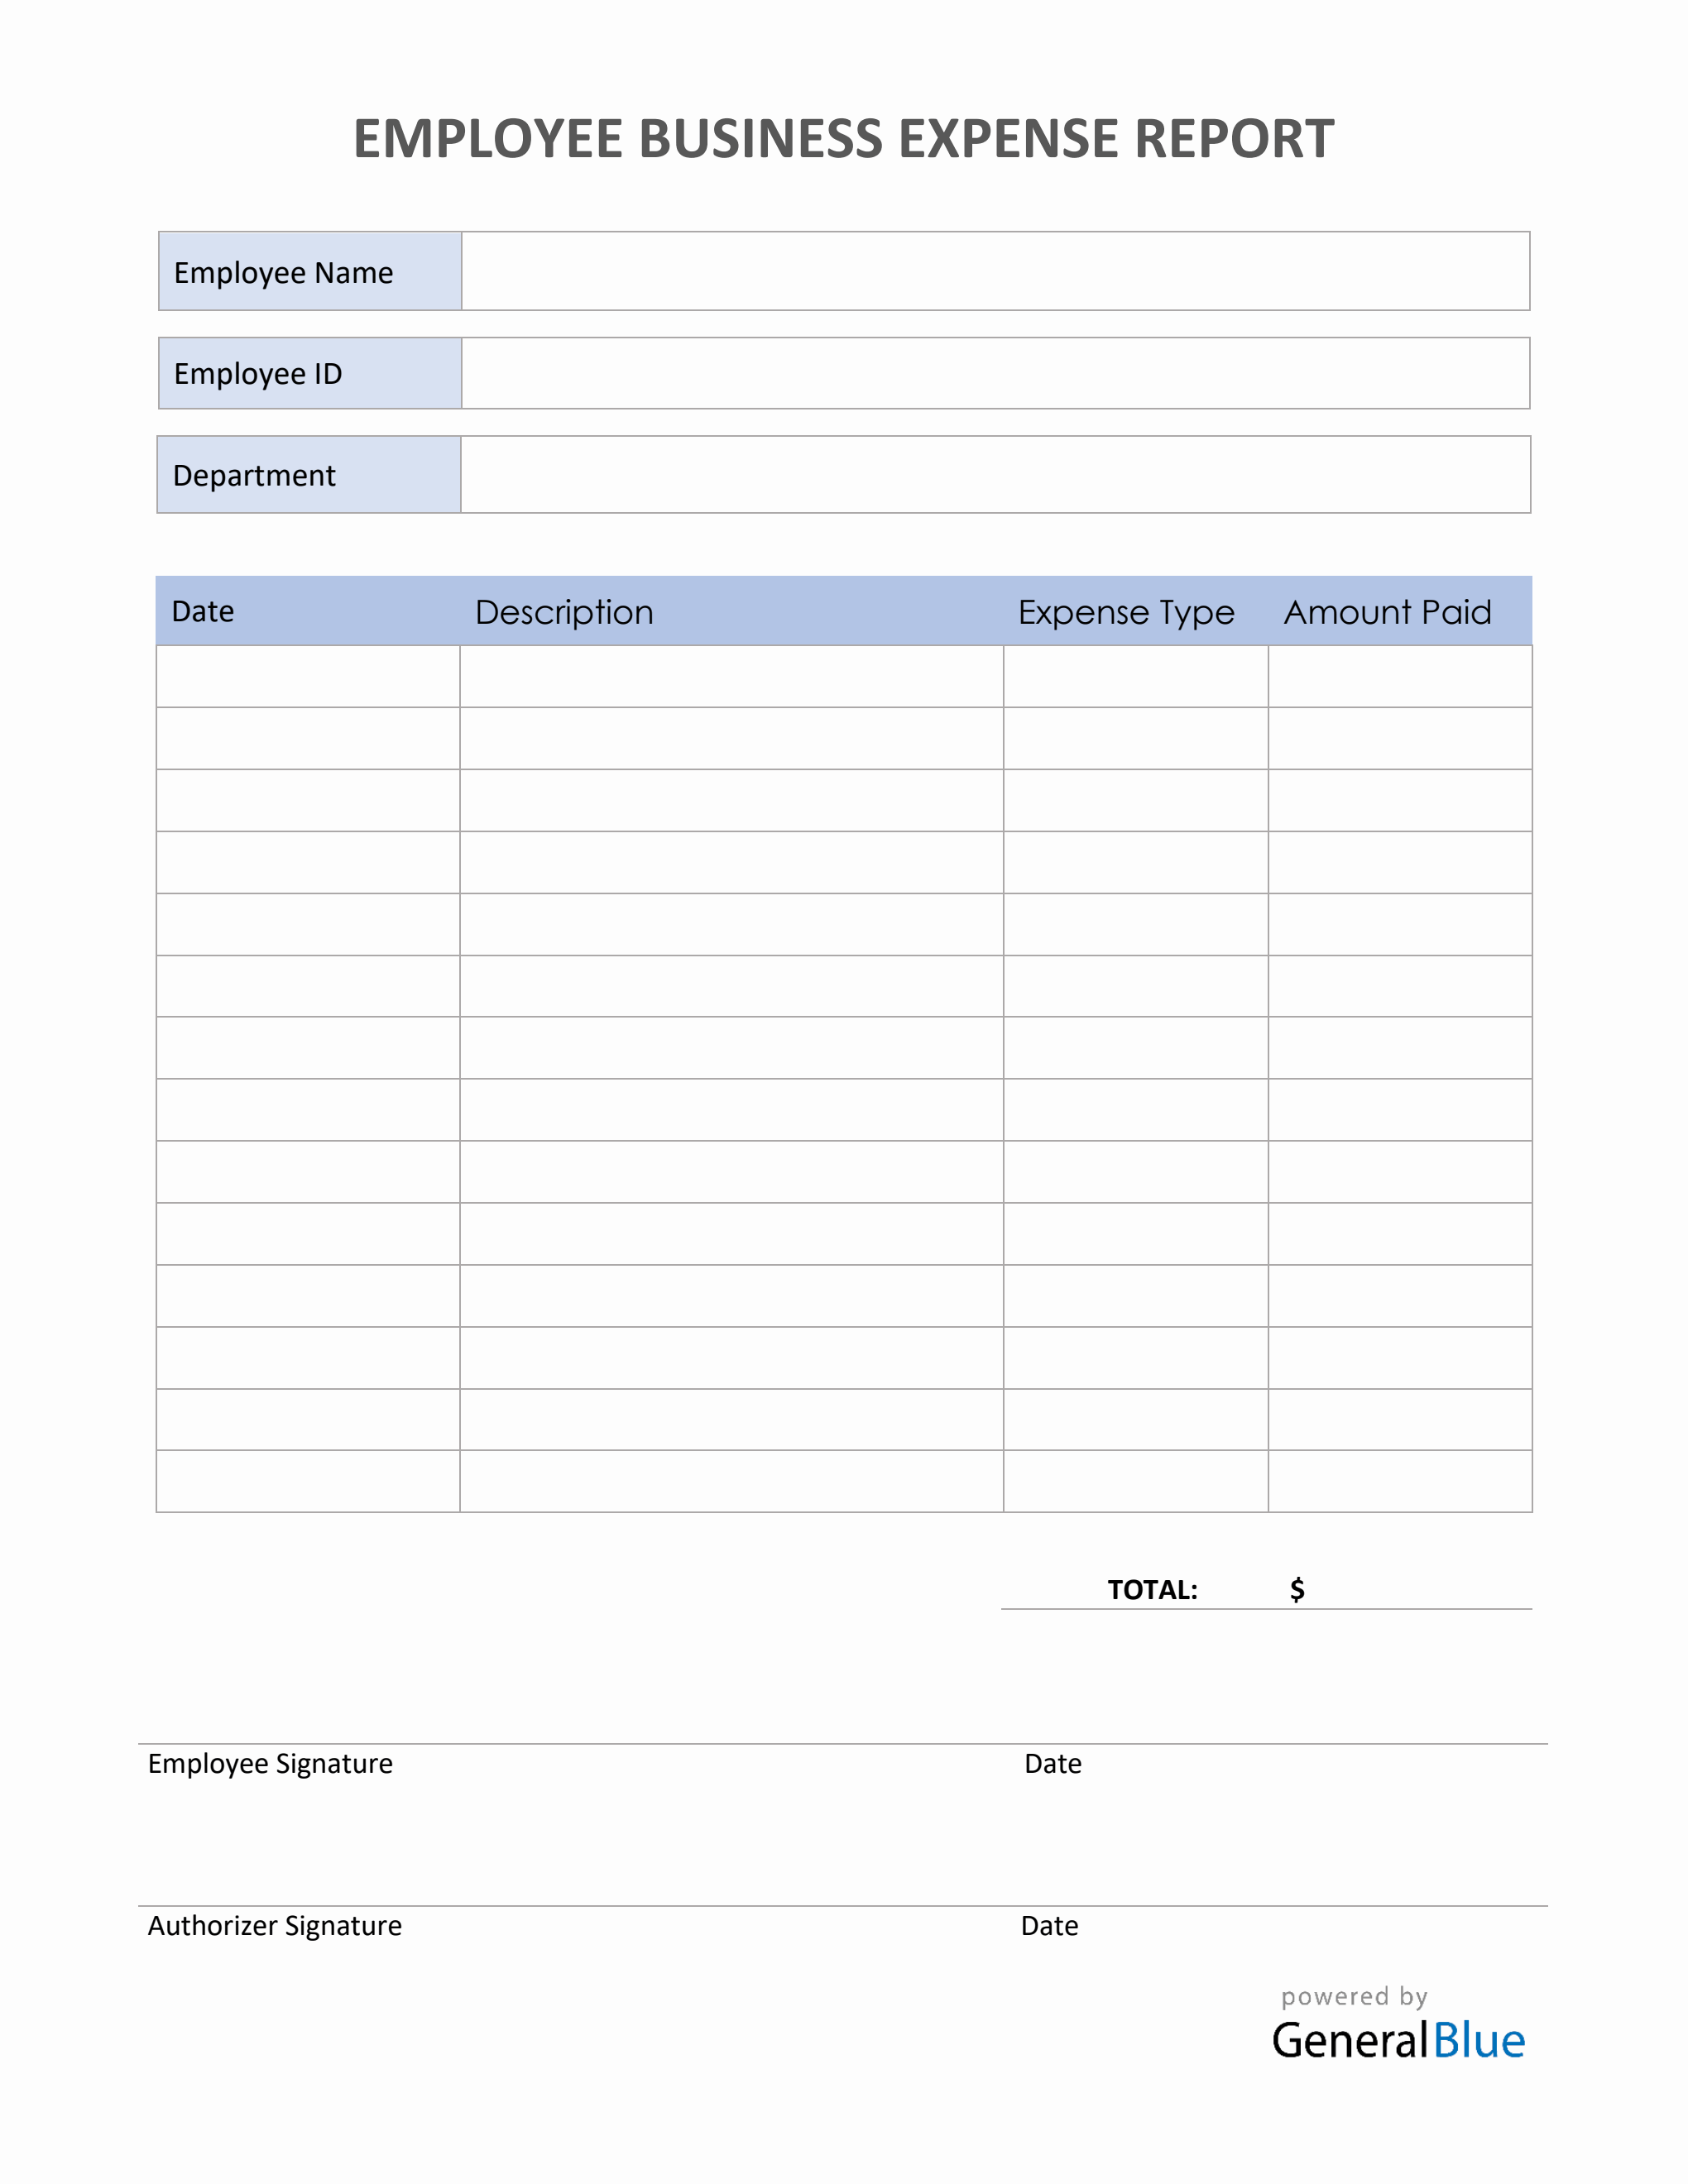 Employee Business Expense Report Template in PDF Intended For Company Expense Report Template